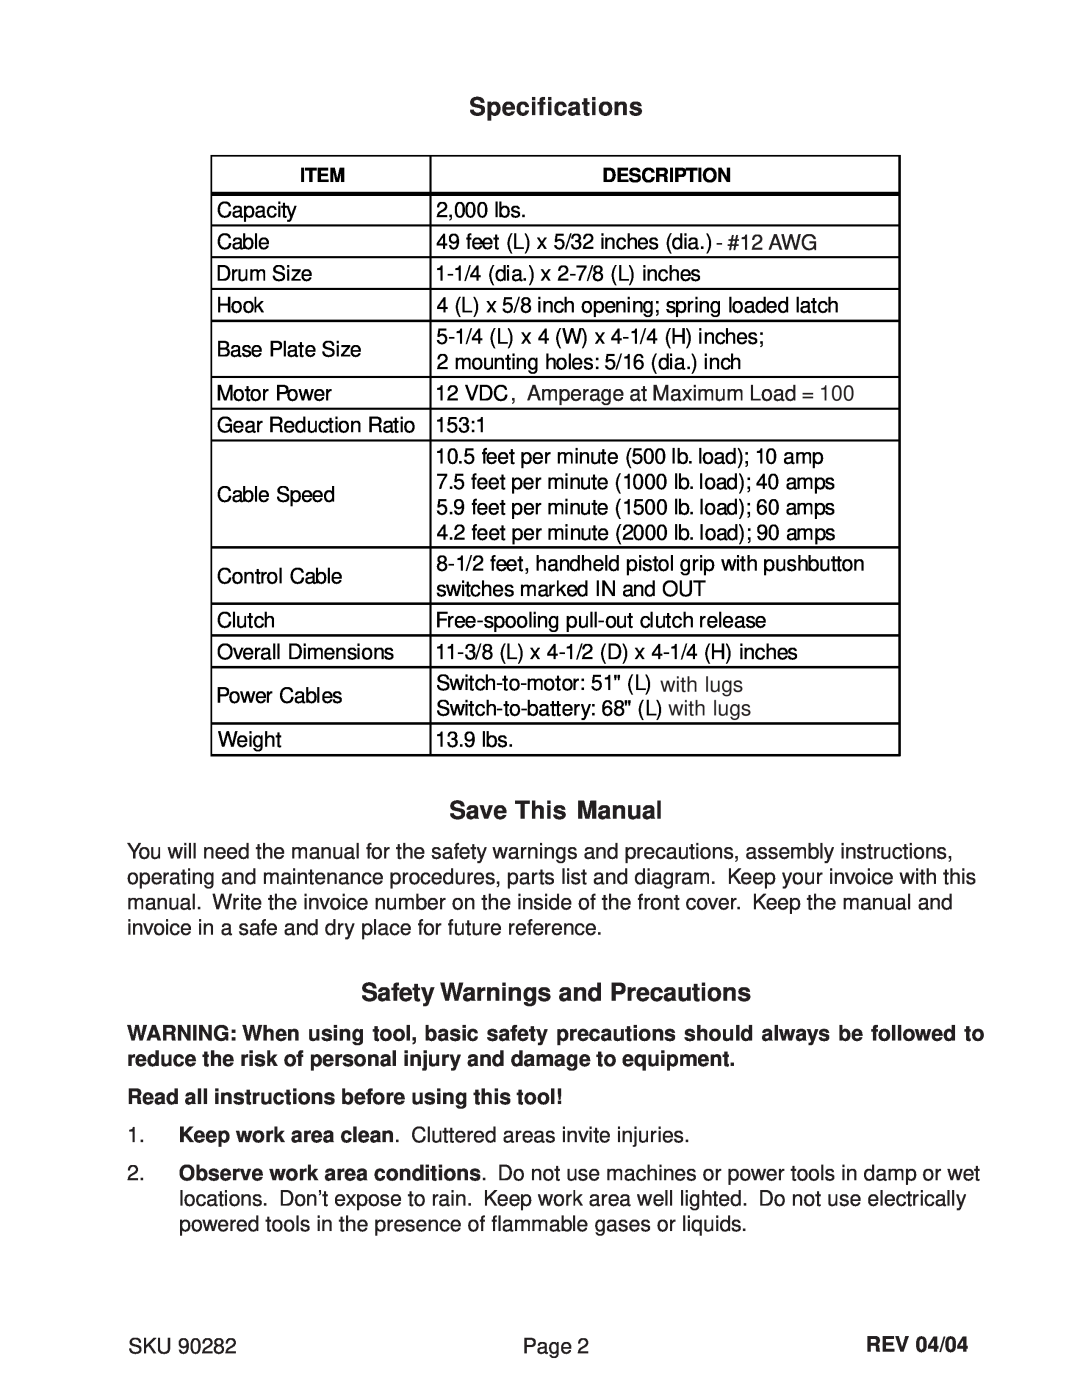 Chicago Electric 90282 manual Specifications, Save This Manual, Safety Warnings and Precautions, REV 04/04 